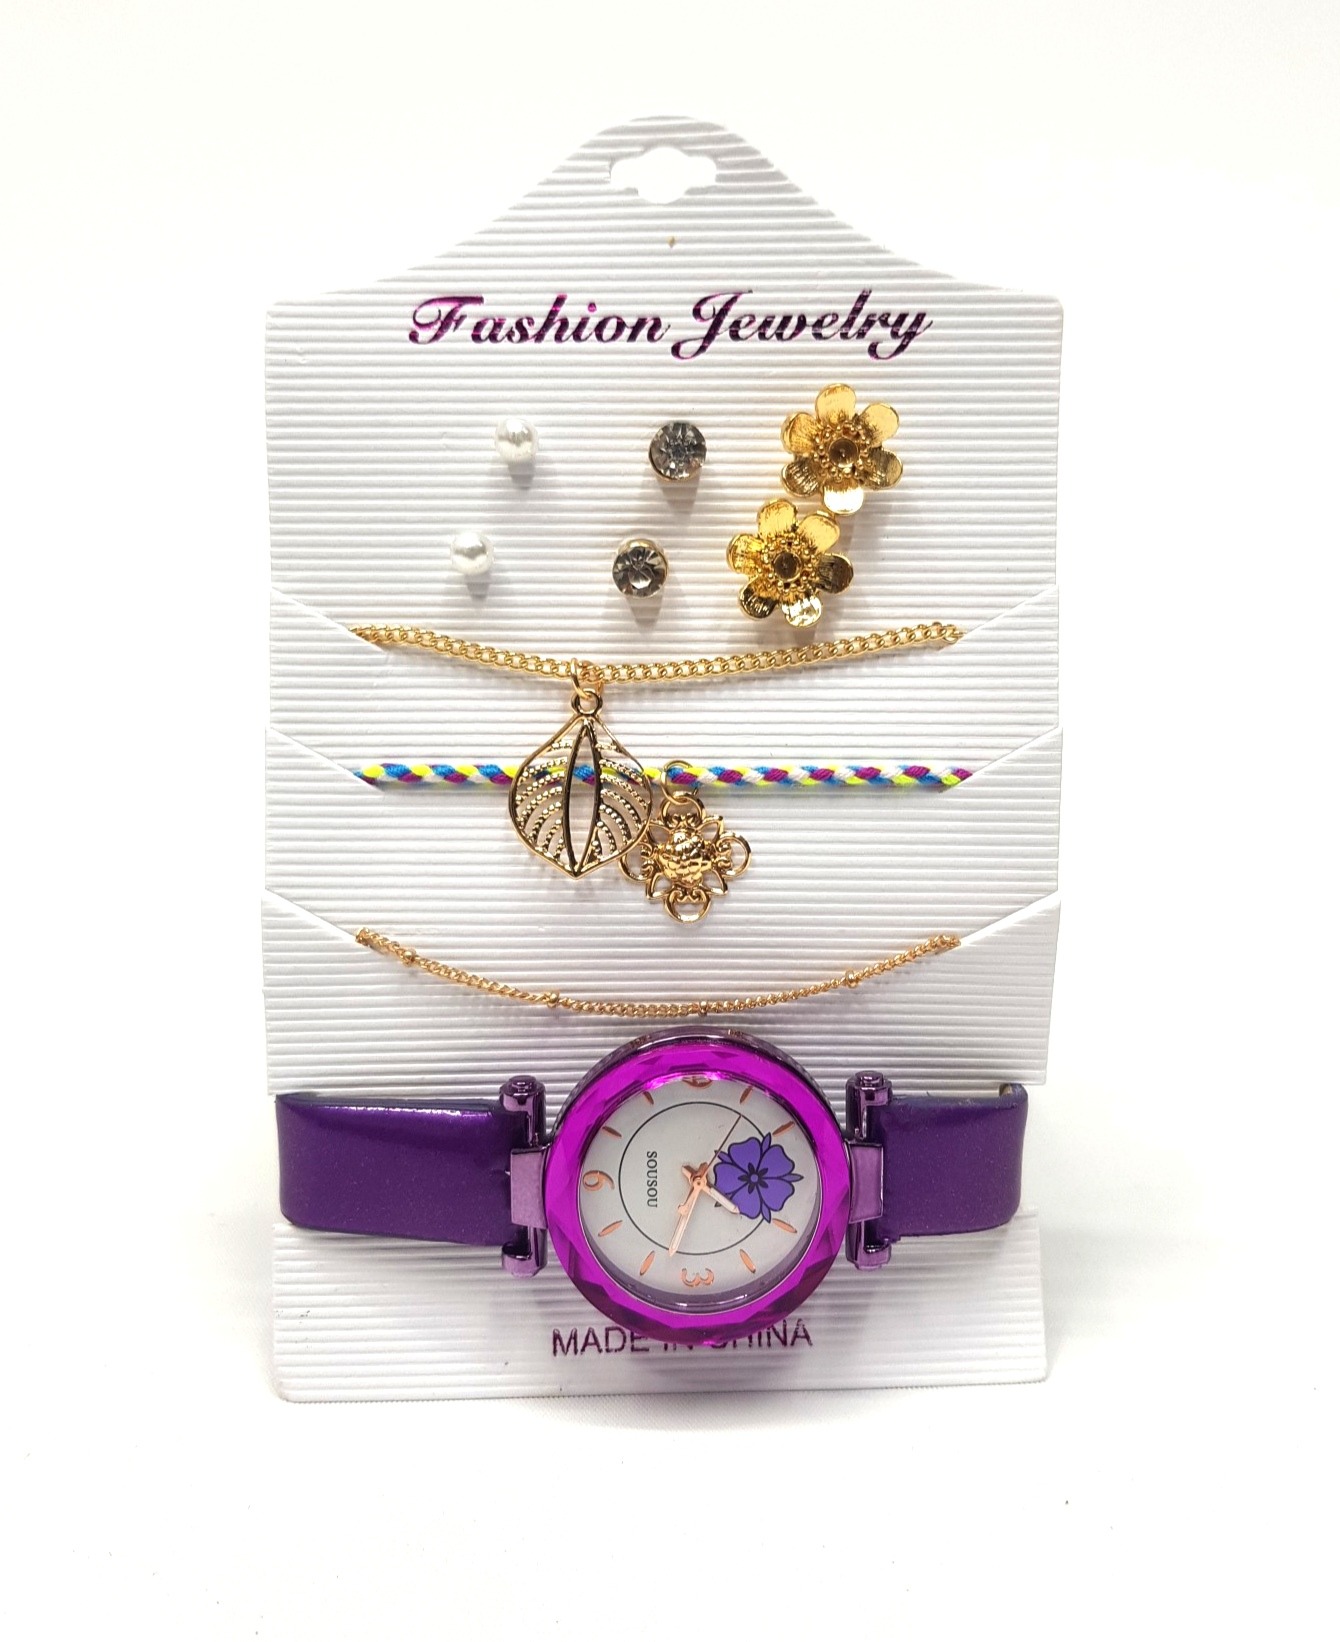 Watch set for Ladies with 3 bracelets and 6 earrings